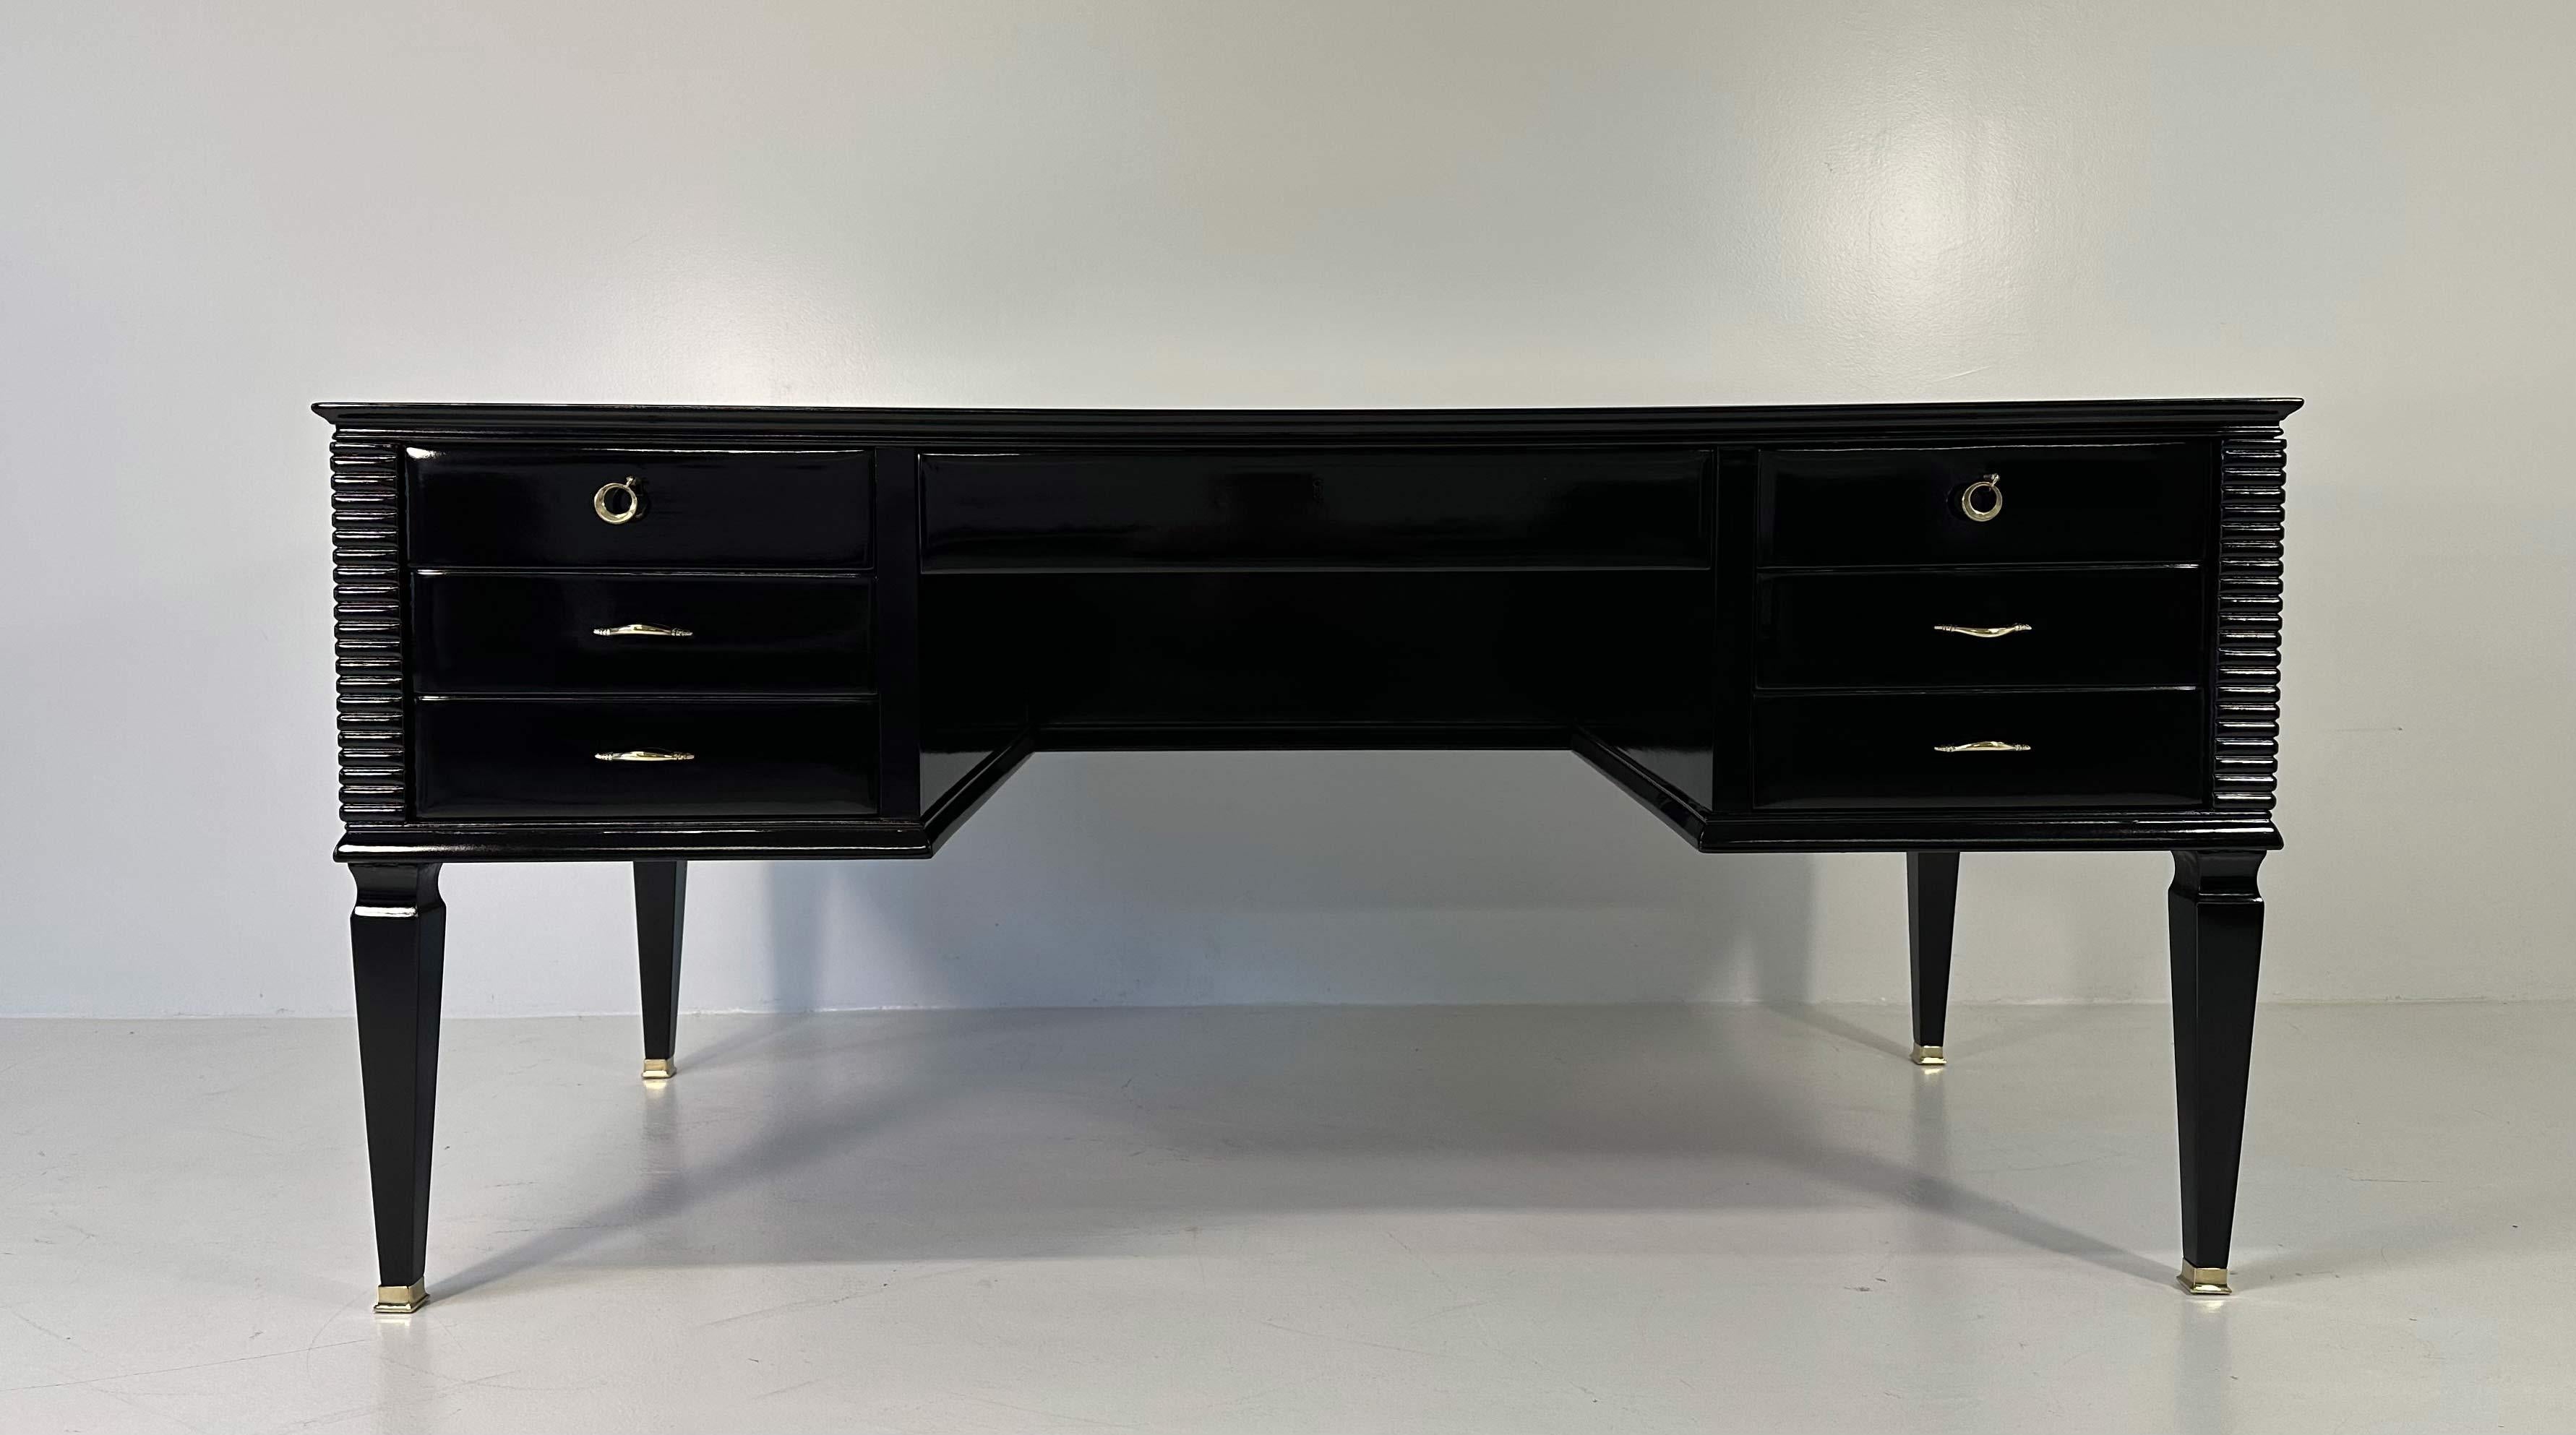 This Art Deco desk was produced in Italy in the 1950s, most likely on a design by Paolo Buffa.
It is entirely in black lacquered solid wood with brass keys, keyholes, handles and tips.
Original black colored glass top.
Completely restored.